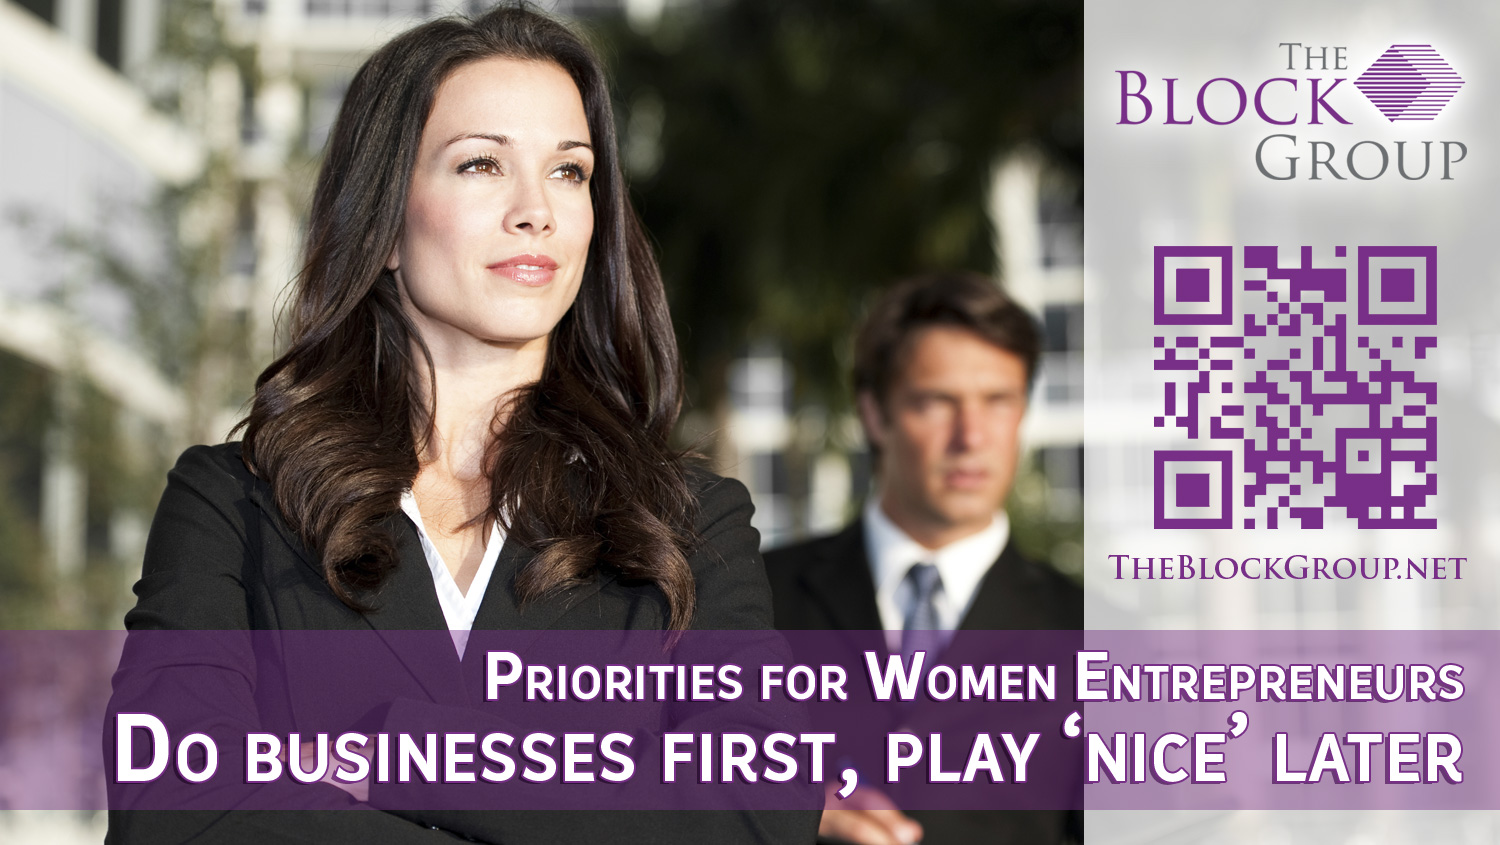 020-Do-businesses-first-play-nice-later